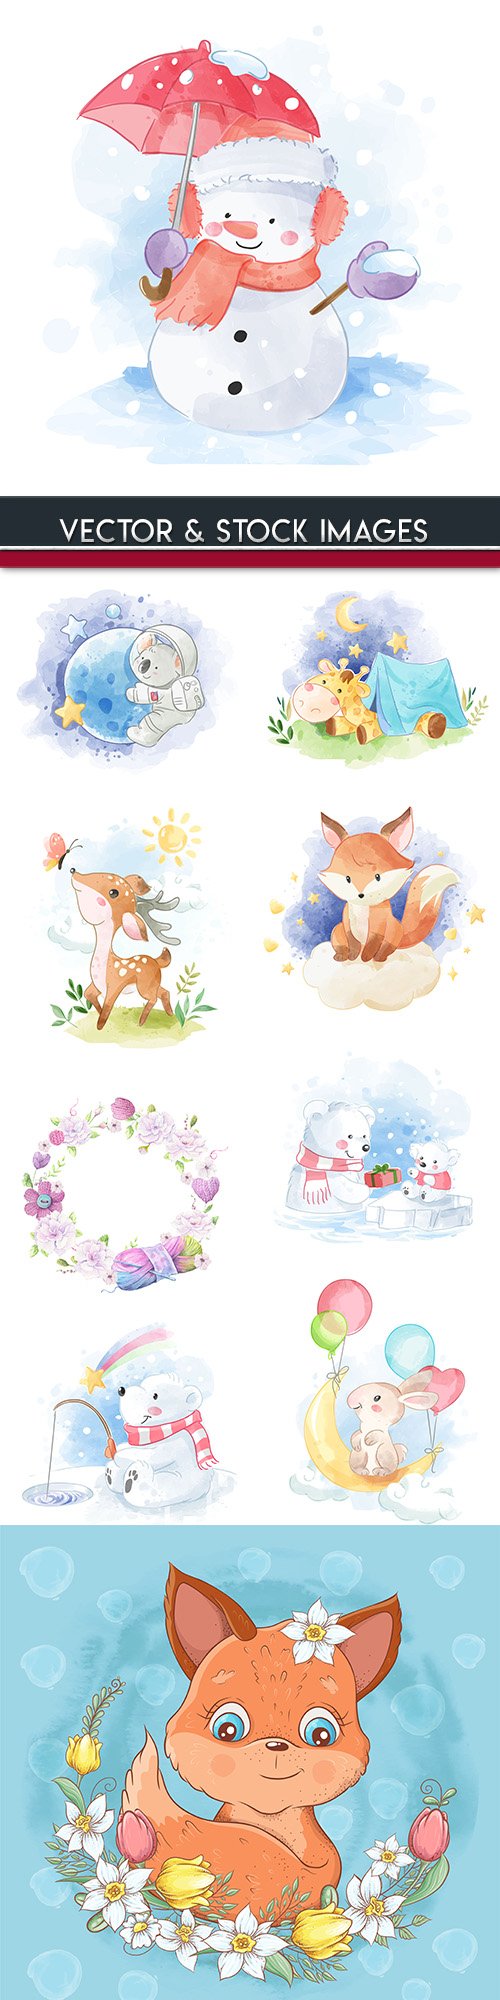 Funny animals flowers and snow watercolor illustrations